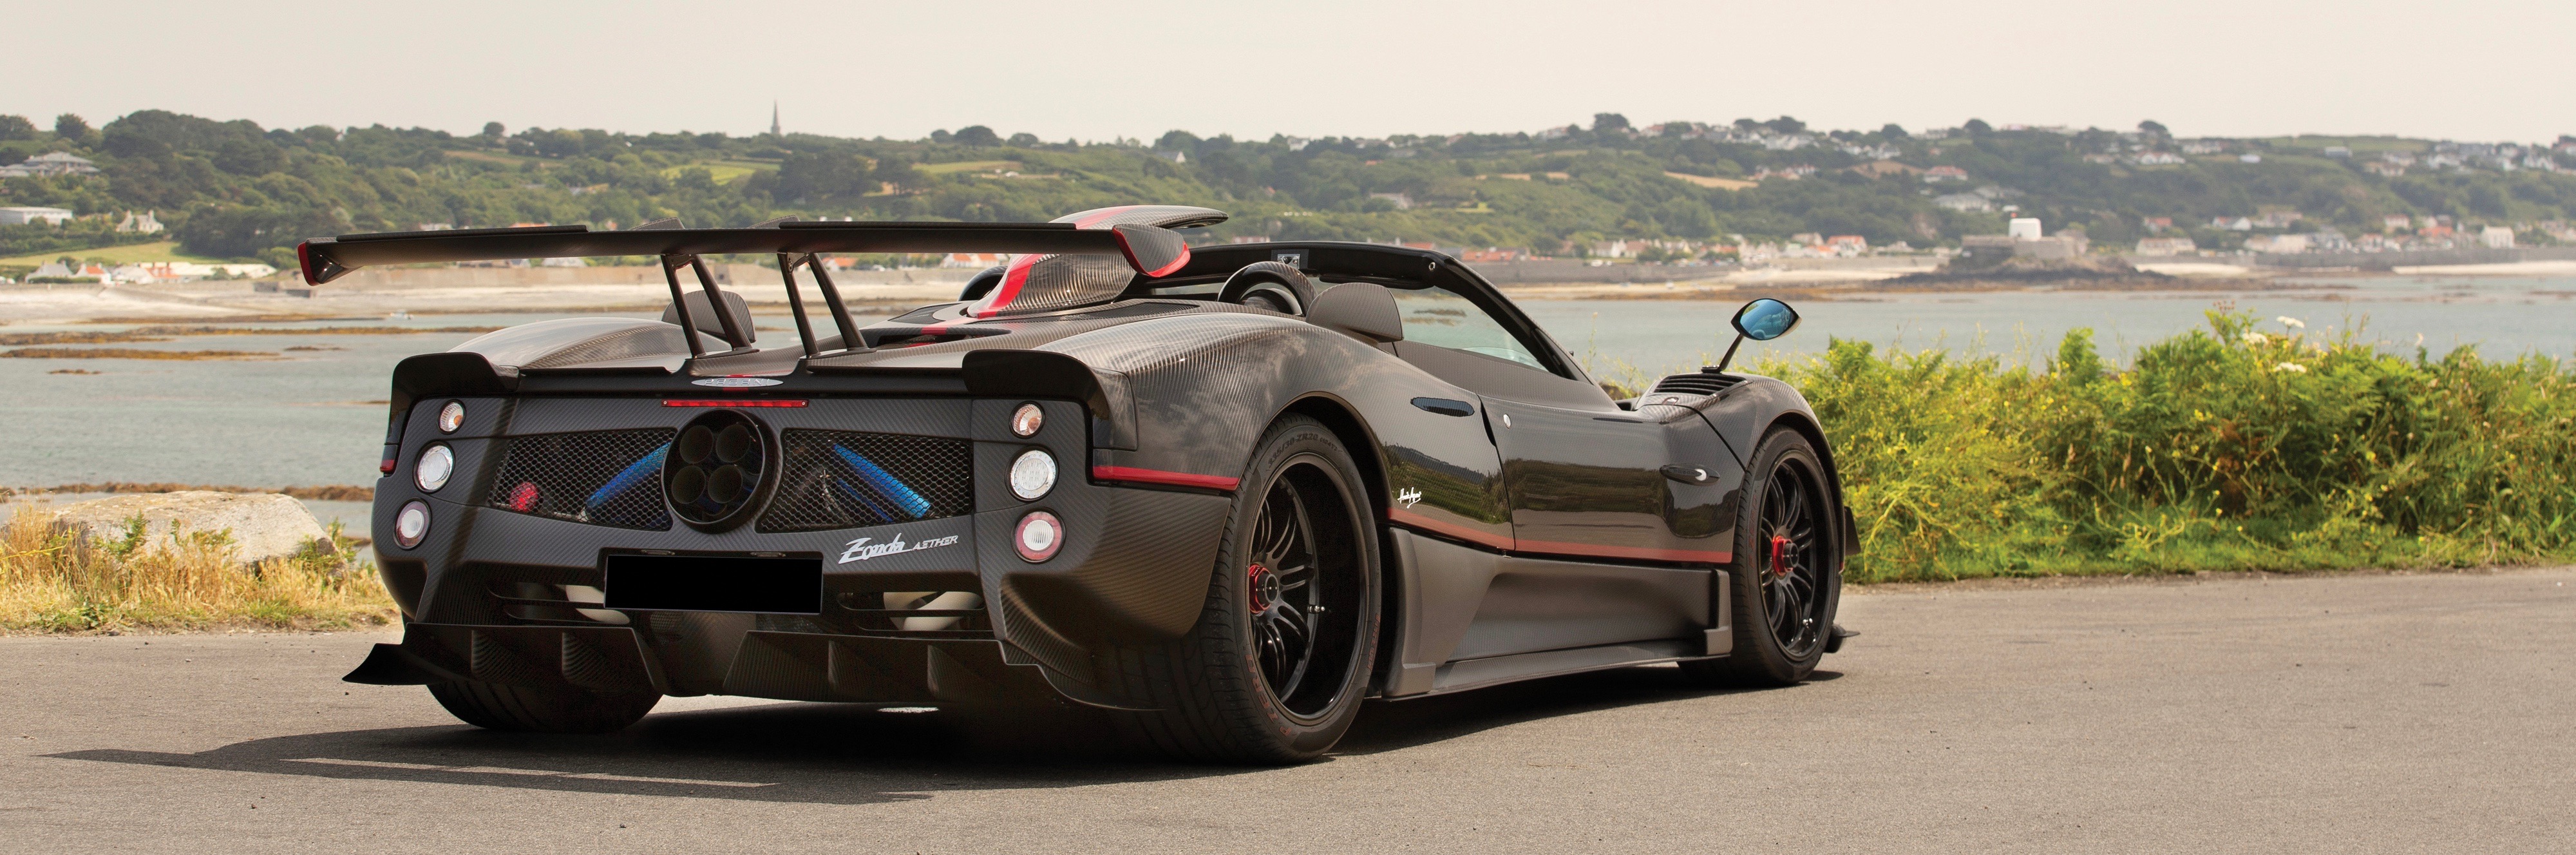 Pagani, RM Sotheby’s lands one-off Pagani for Abu Dhabi auction, ClassicCars.com Journal